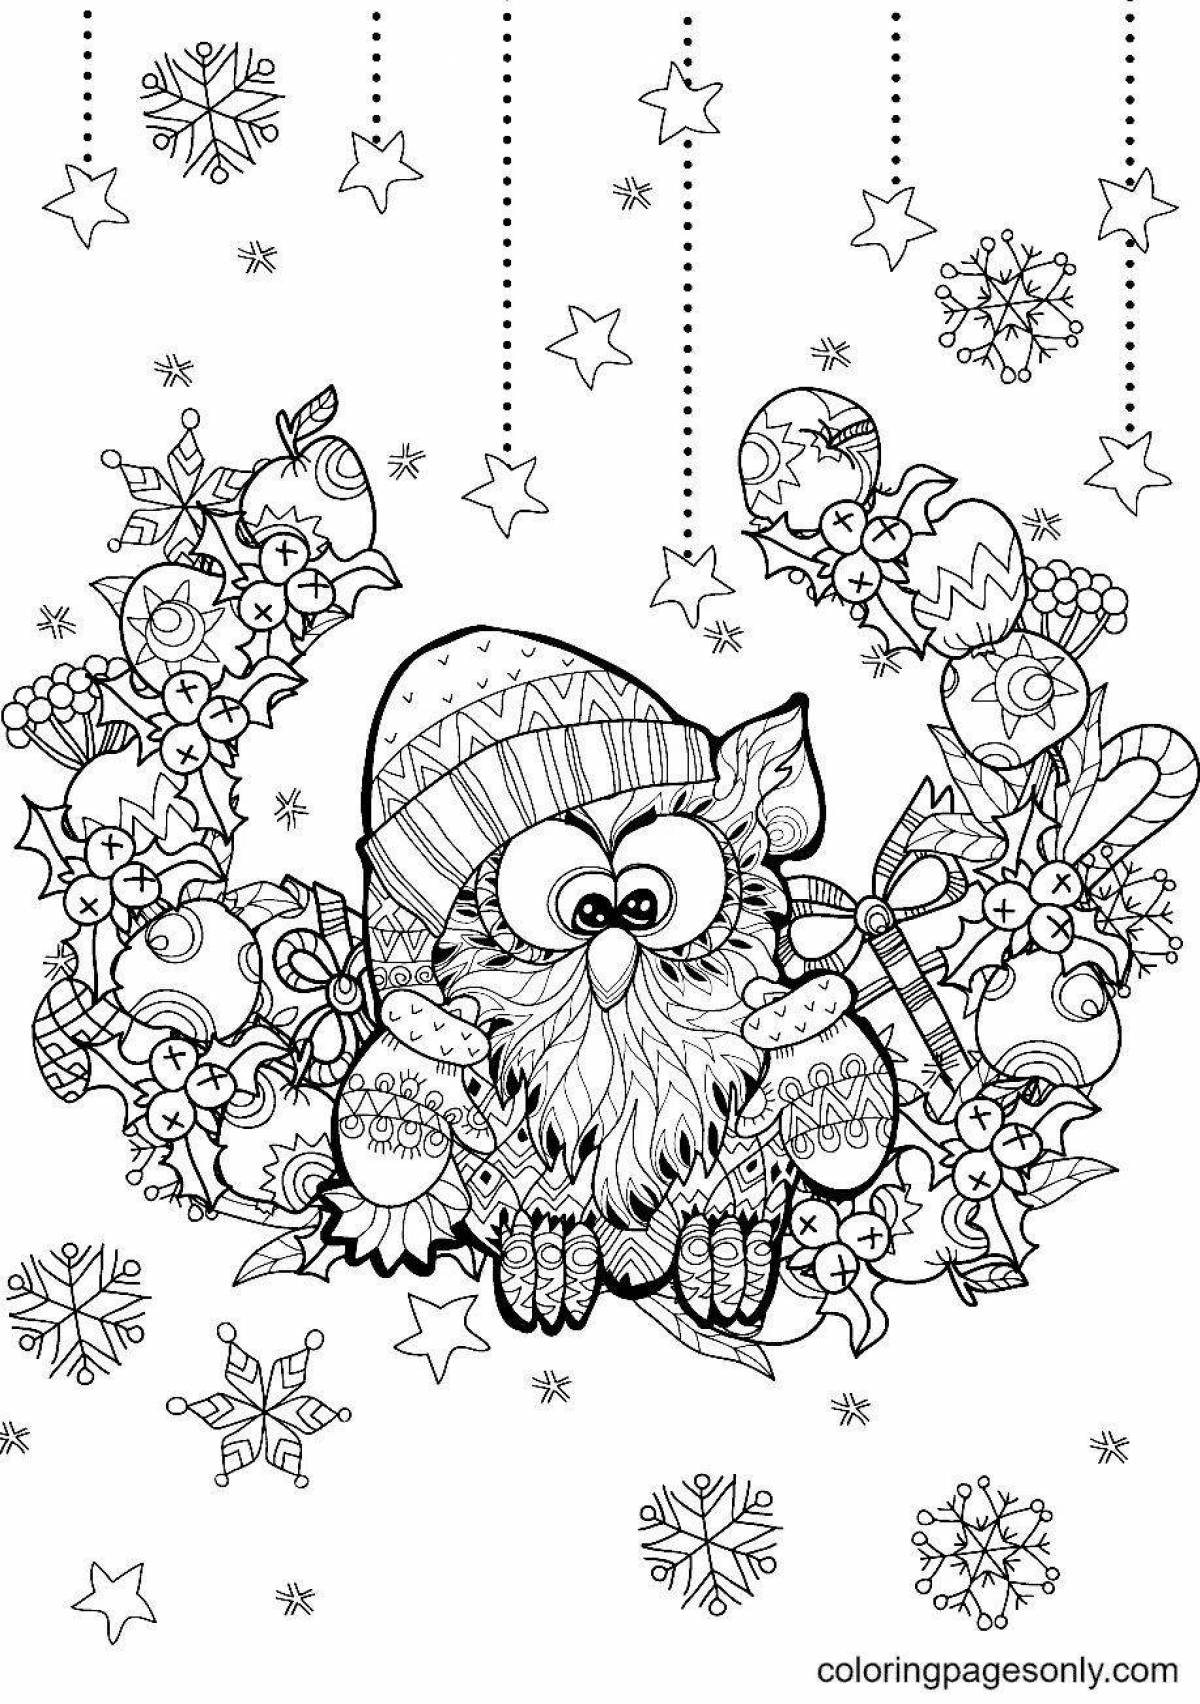 Sparkling Christmas owl coloring page